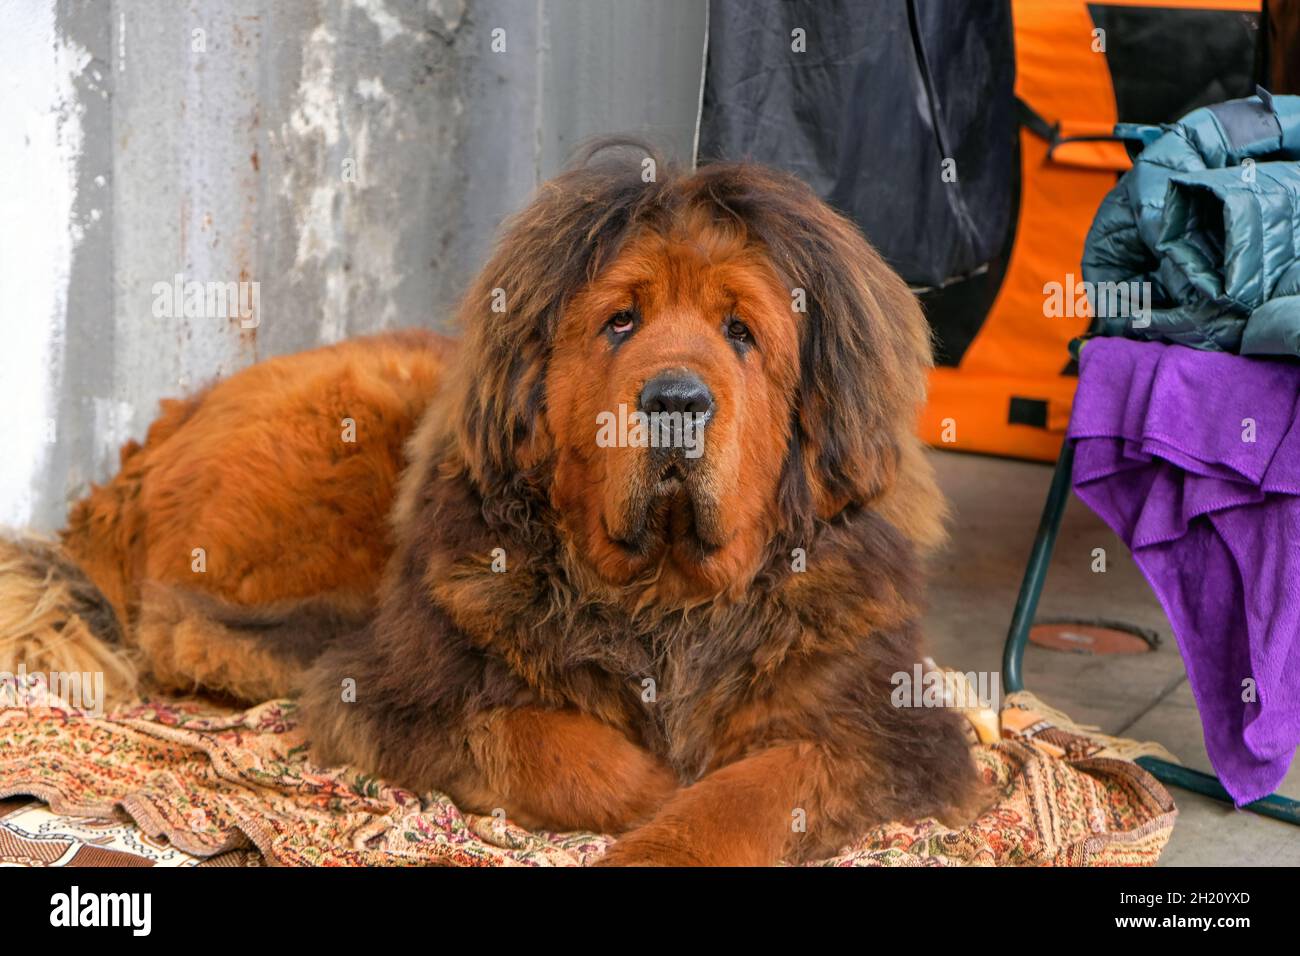 The Tibetan Mastiff dog lies on the rug and looks into the camera. Tibetan Mastiff puppy of red color close-up. Large brown dog is resting on the carp Stock Photo